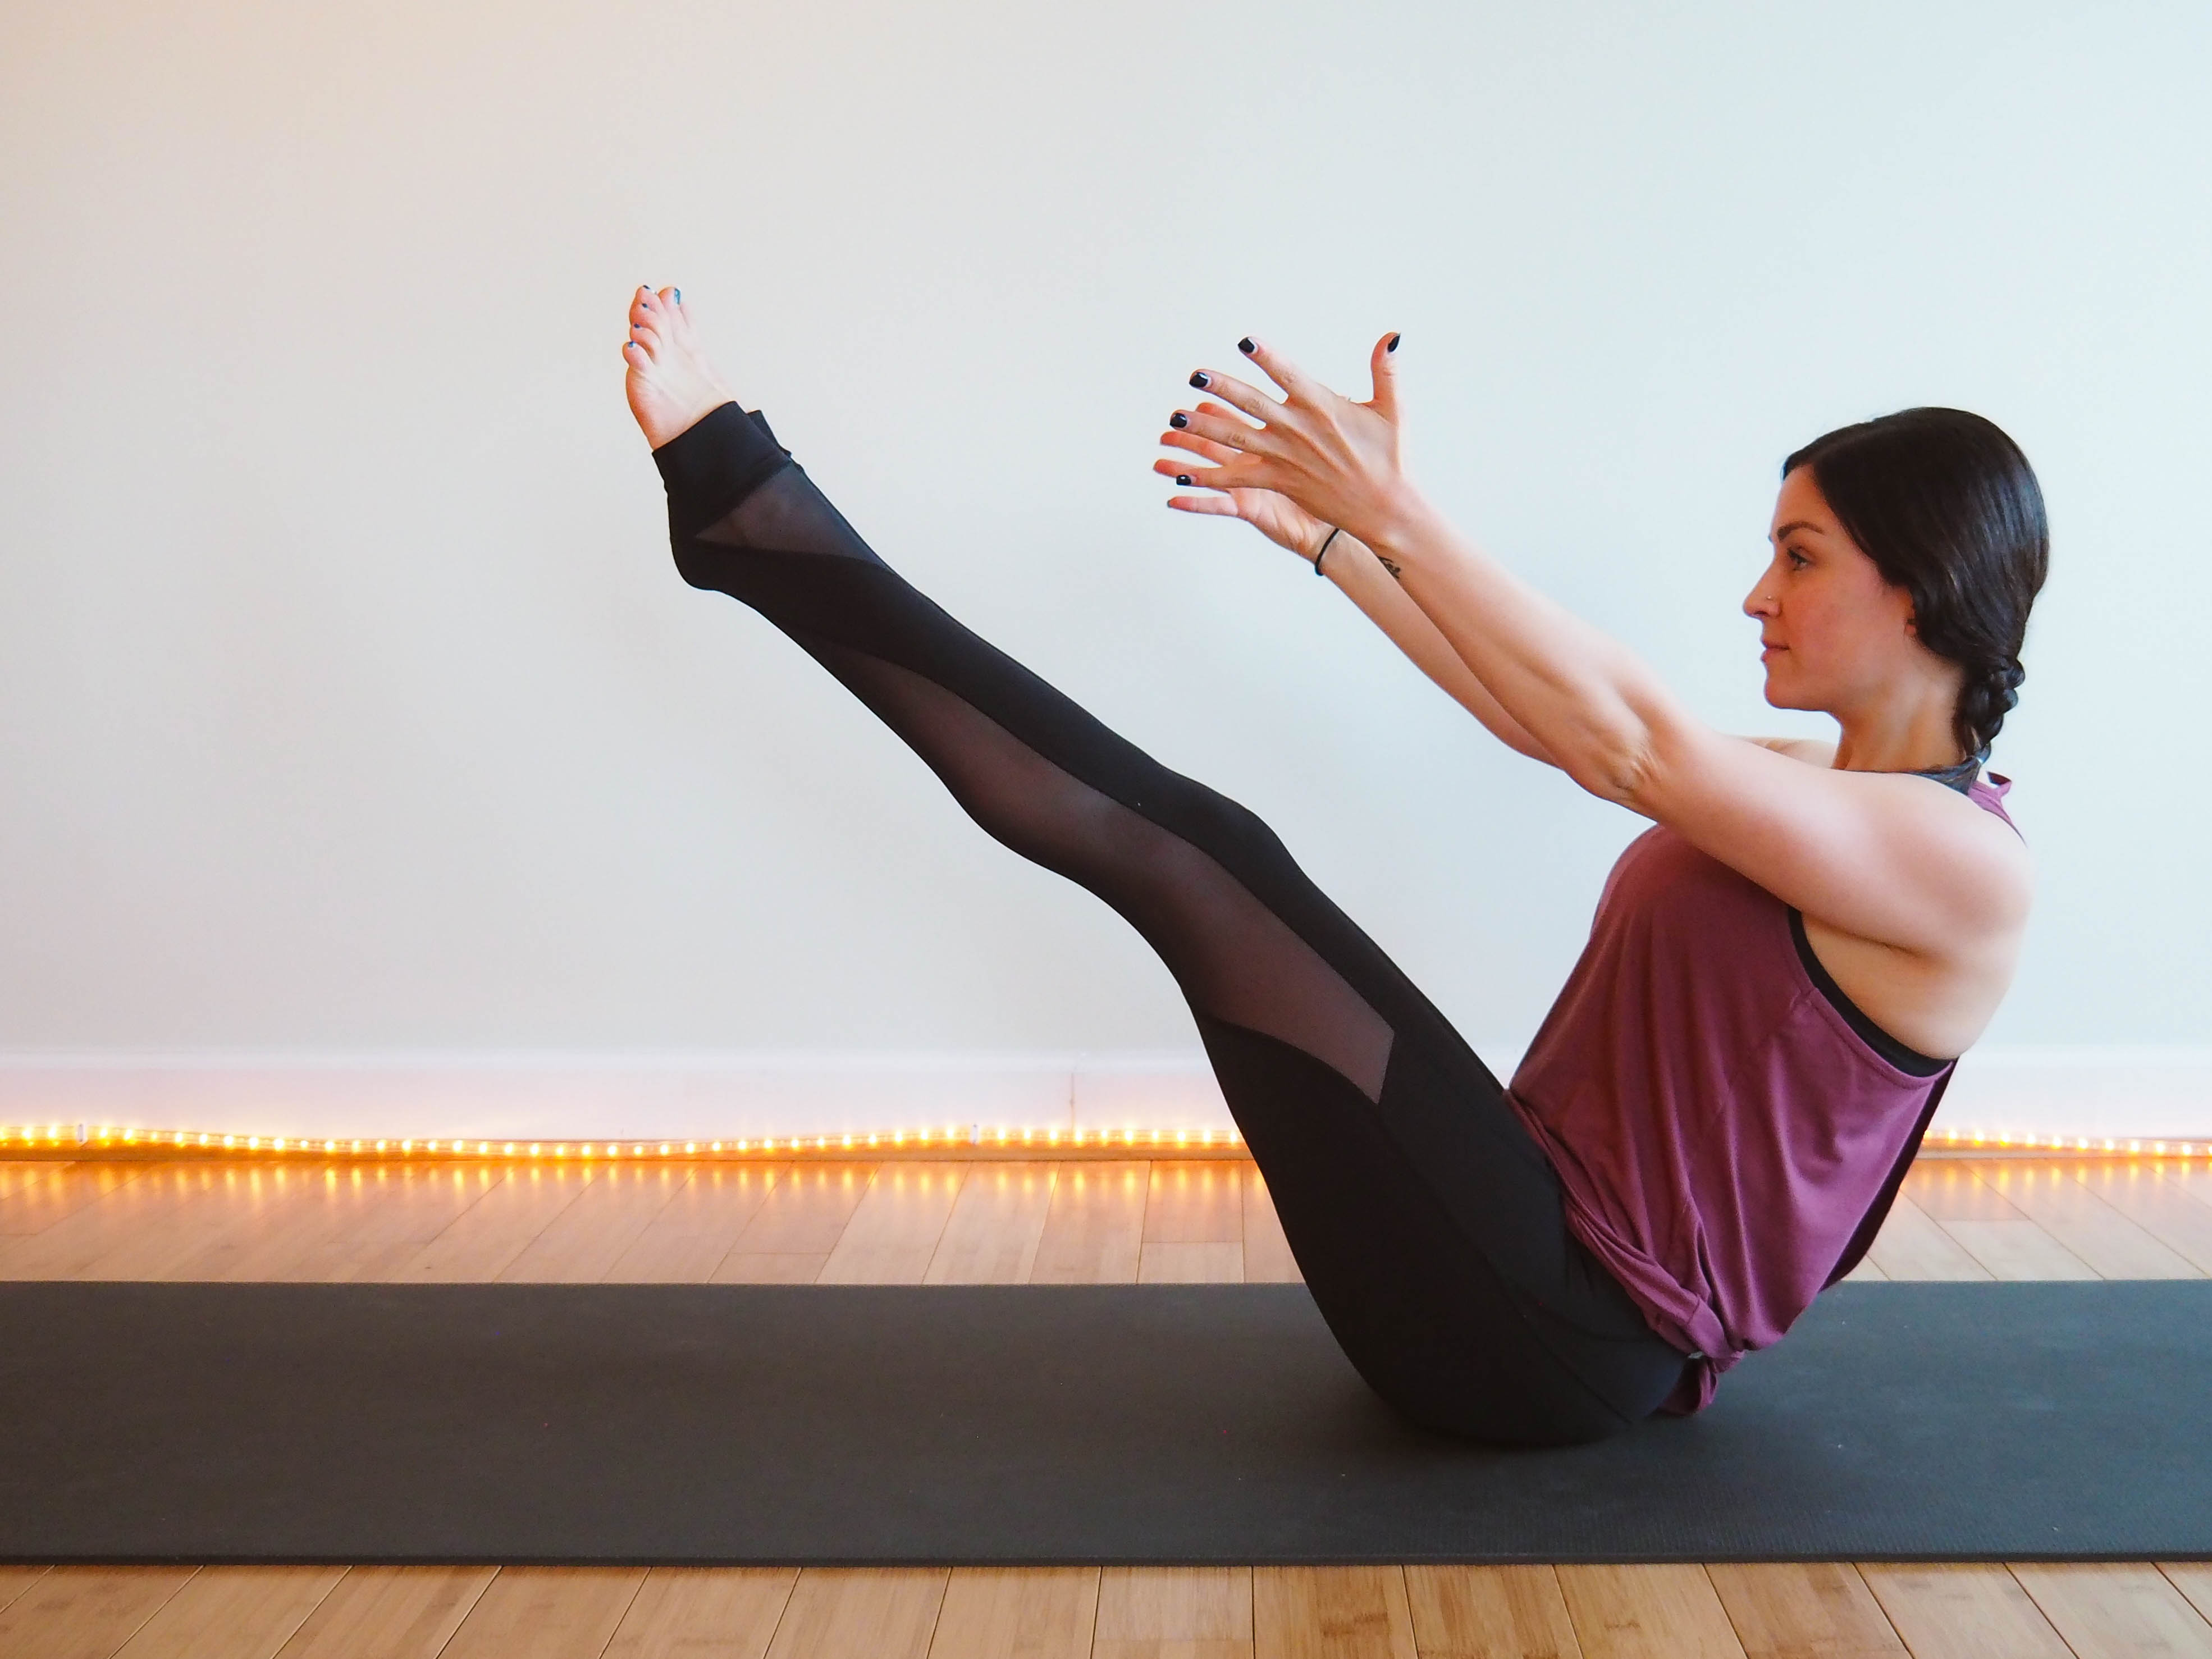 Yoga Poses That Strengthen Your Abs and Core | POPSUGAR Fitness